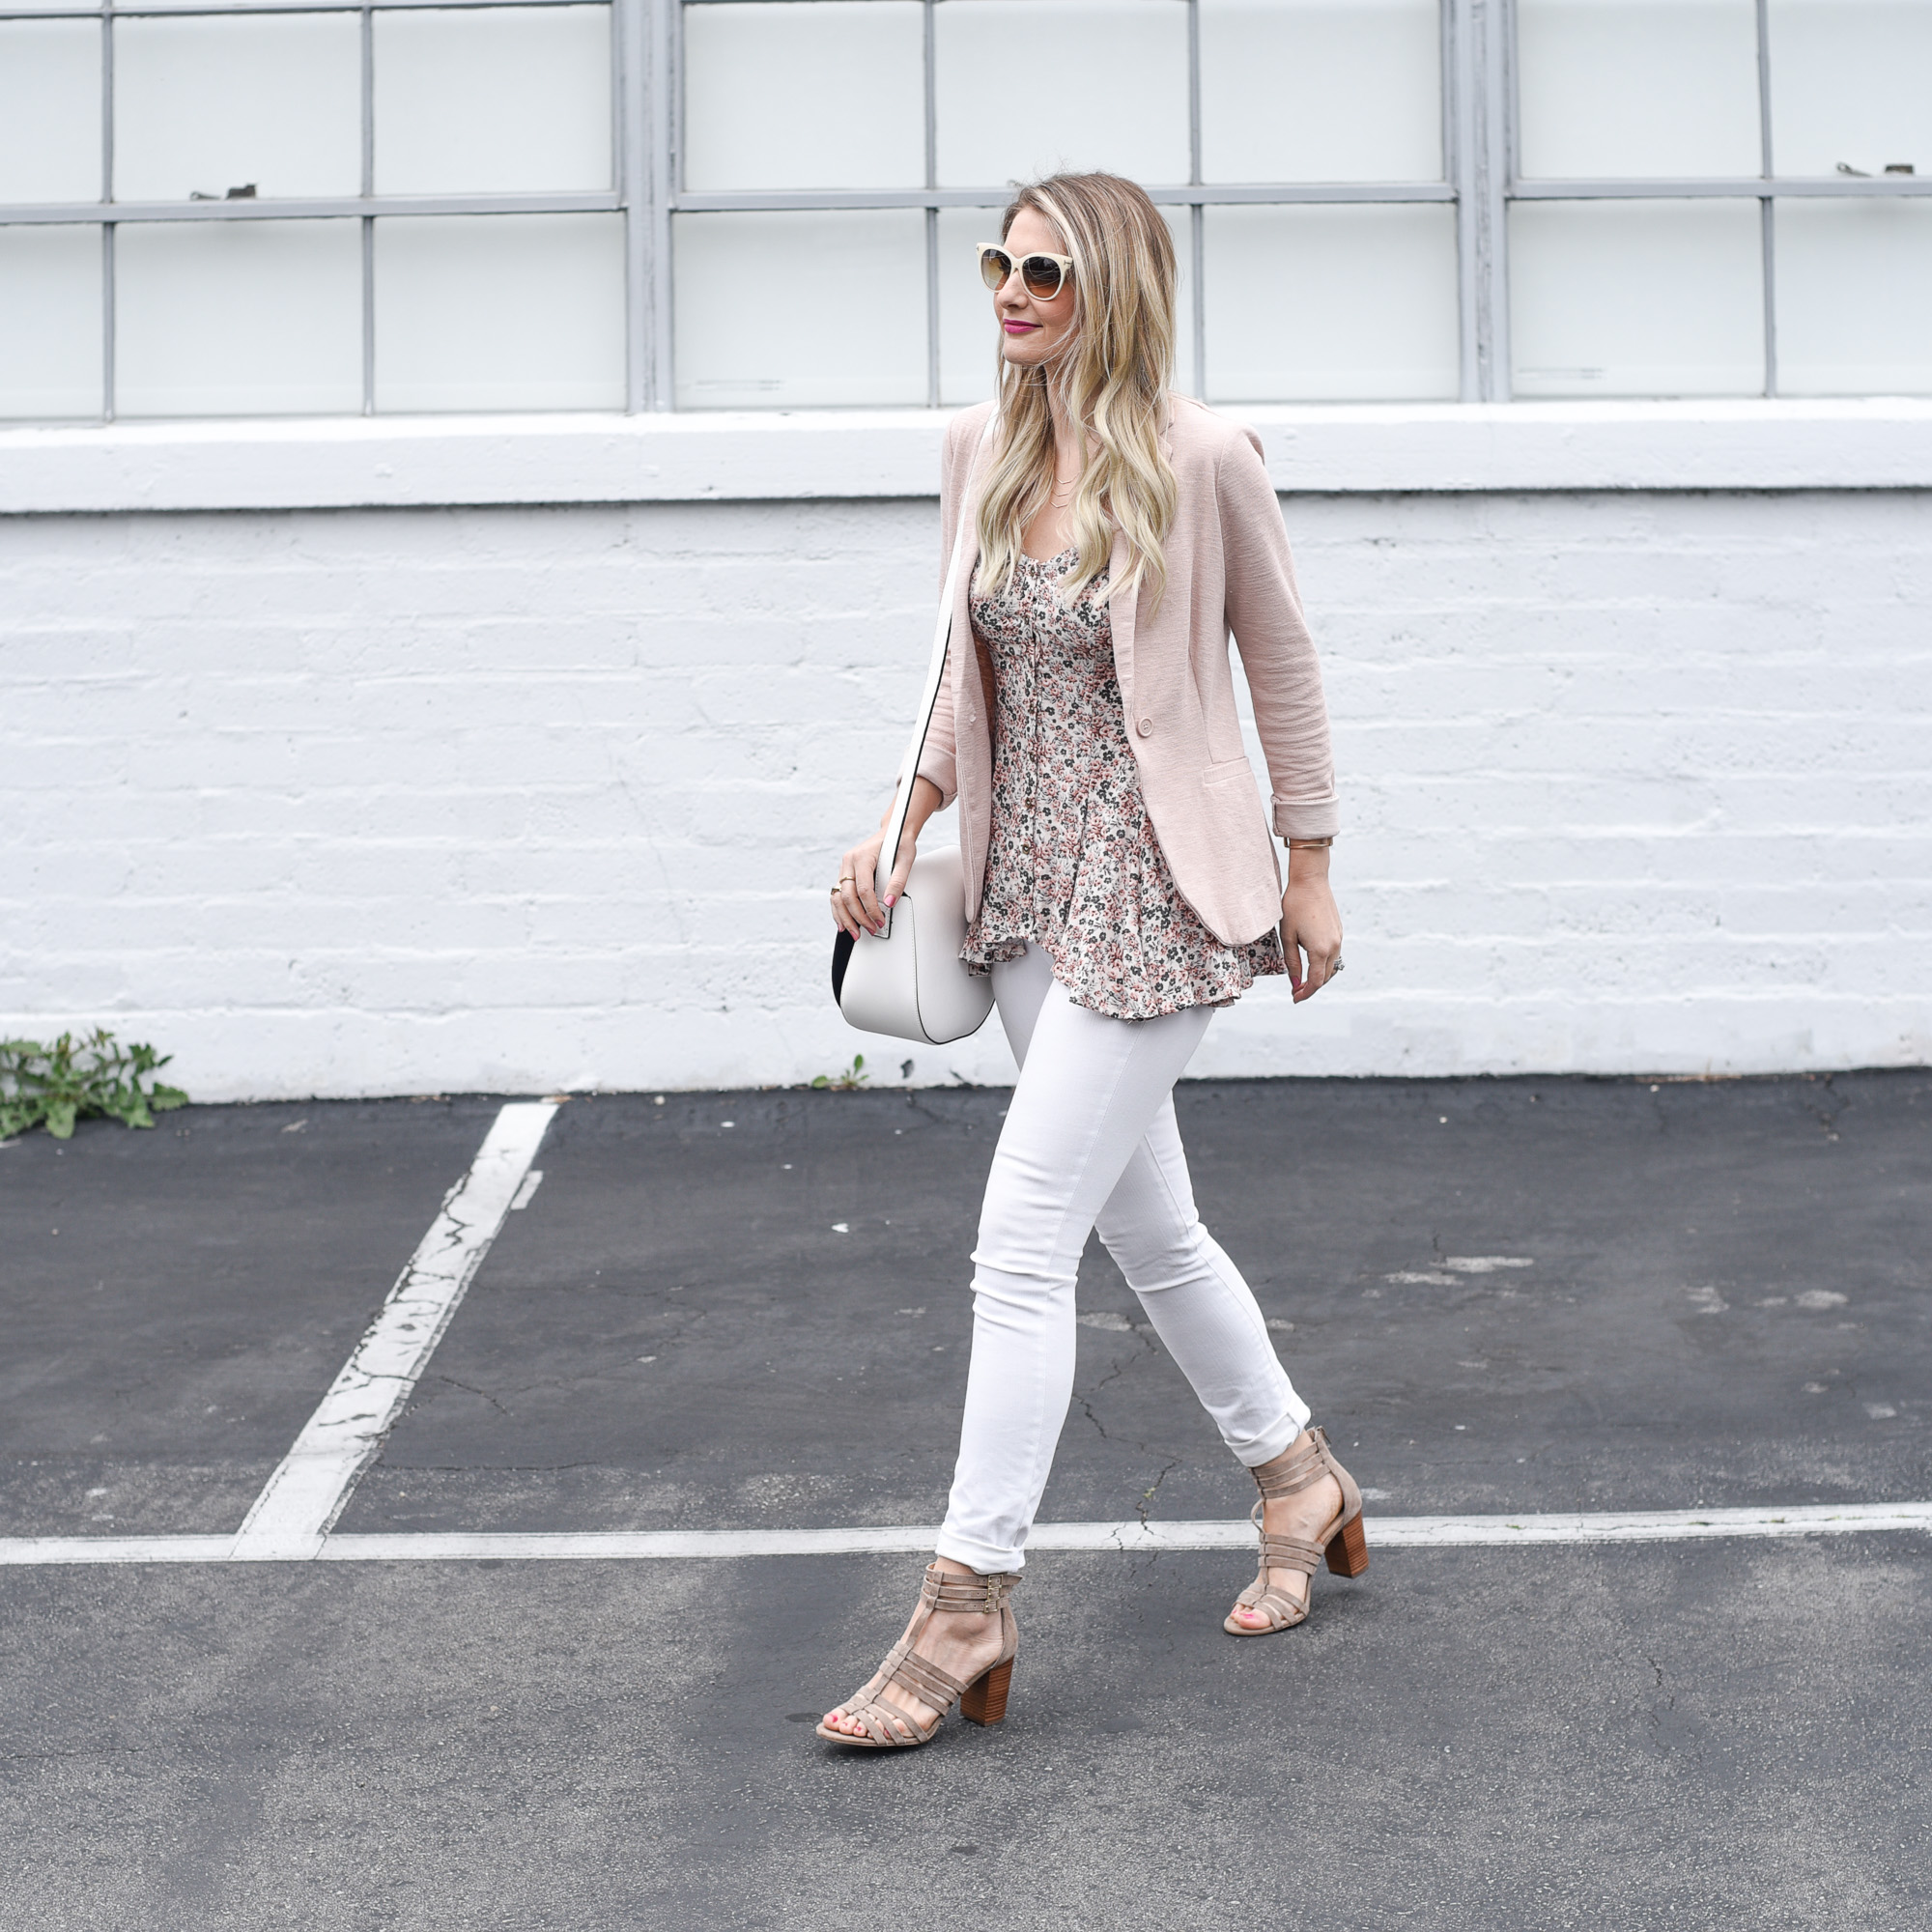 Visions of Vogue wearing a blush blazer and the Jenna bustier top. 